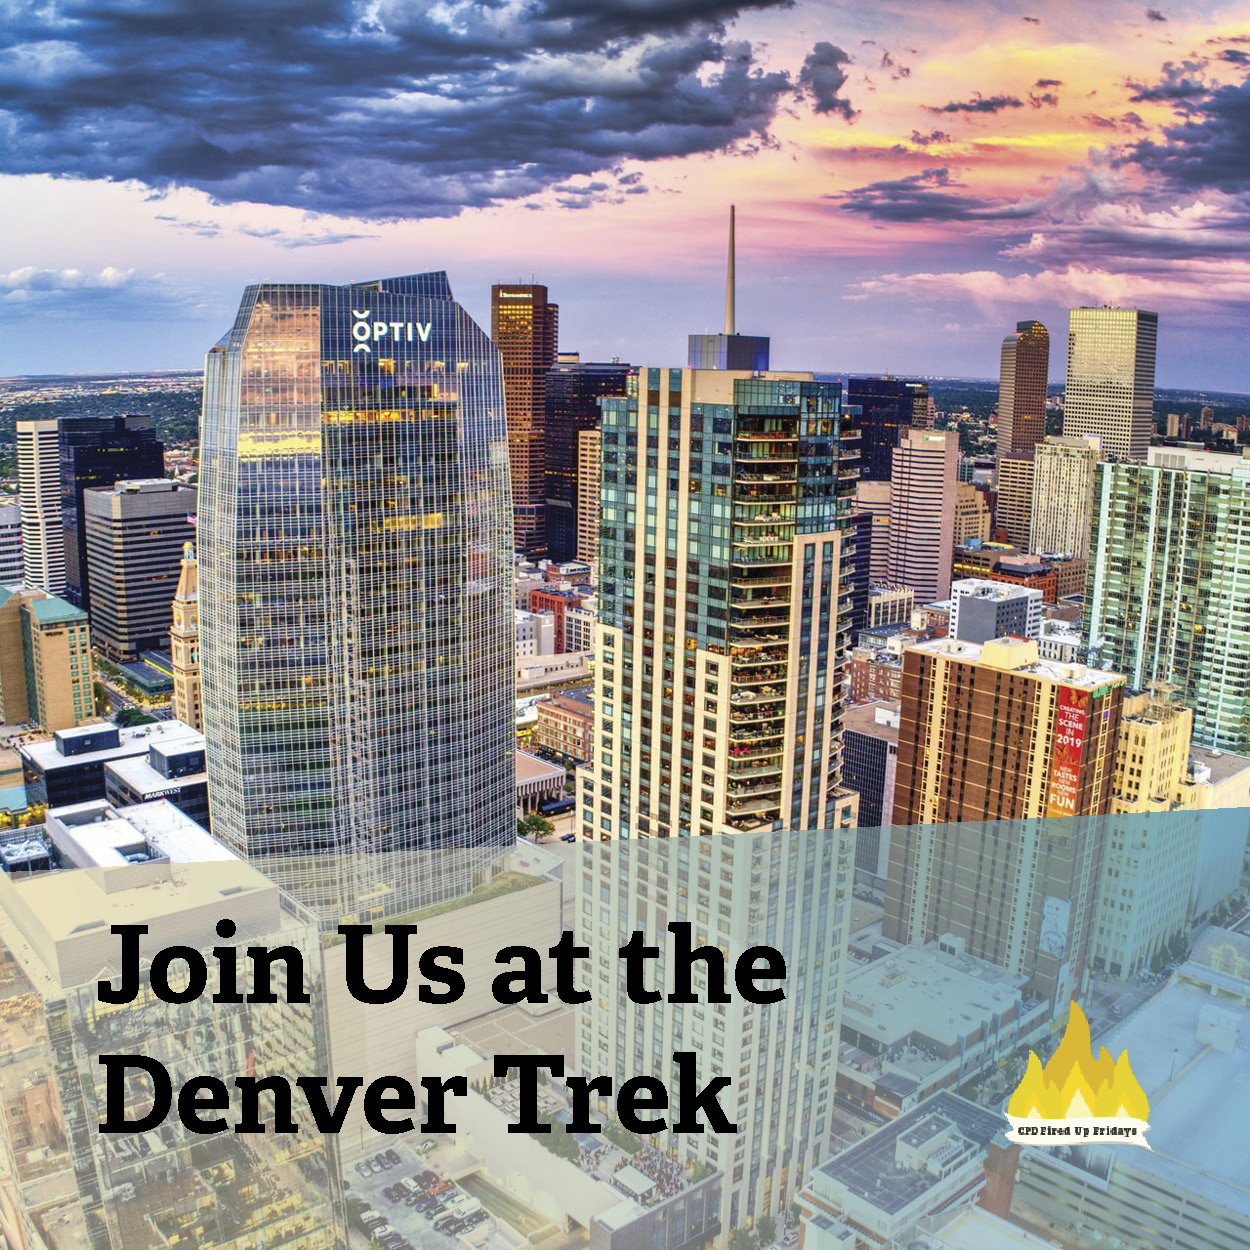 A bird's eye view of downtown Denver, with skyscrapers reaching up and glimmering in the sunset. The sky is partly cloudy with rich blue, yellow and pink hues. Underneath the image, text reads: 'Join Us at the Denver Trek.'